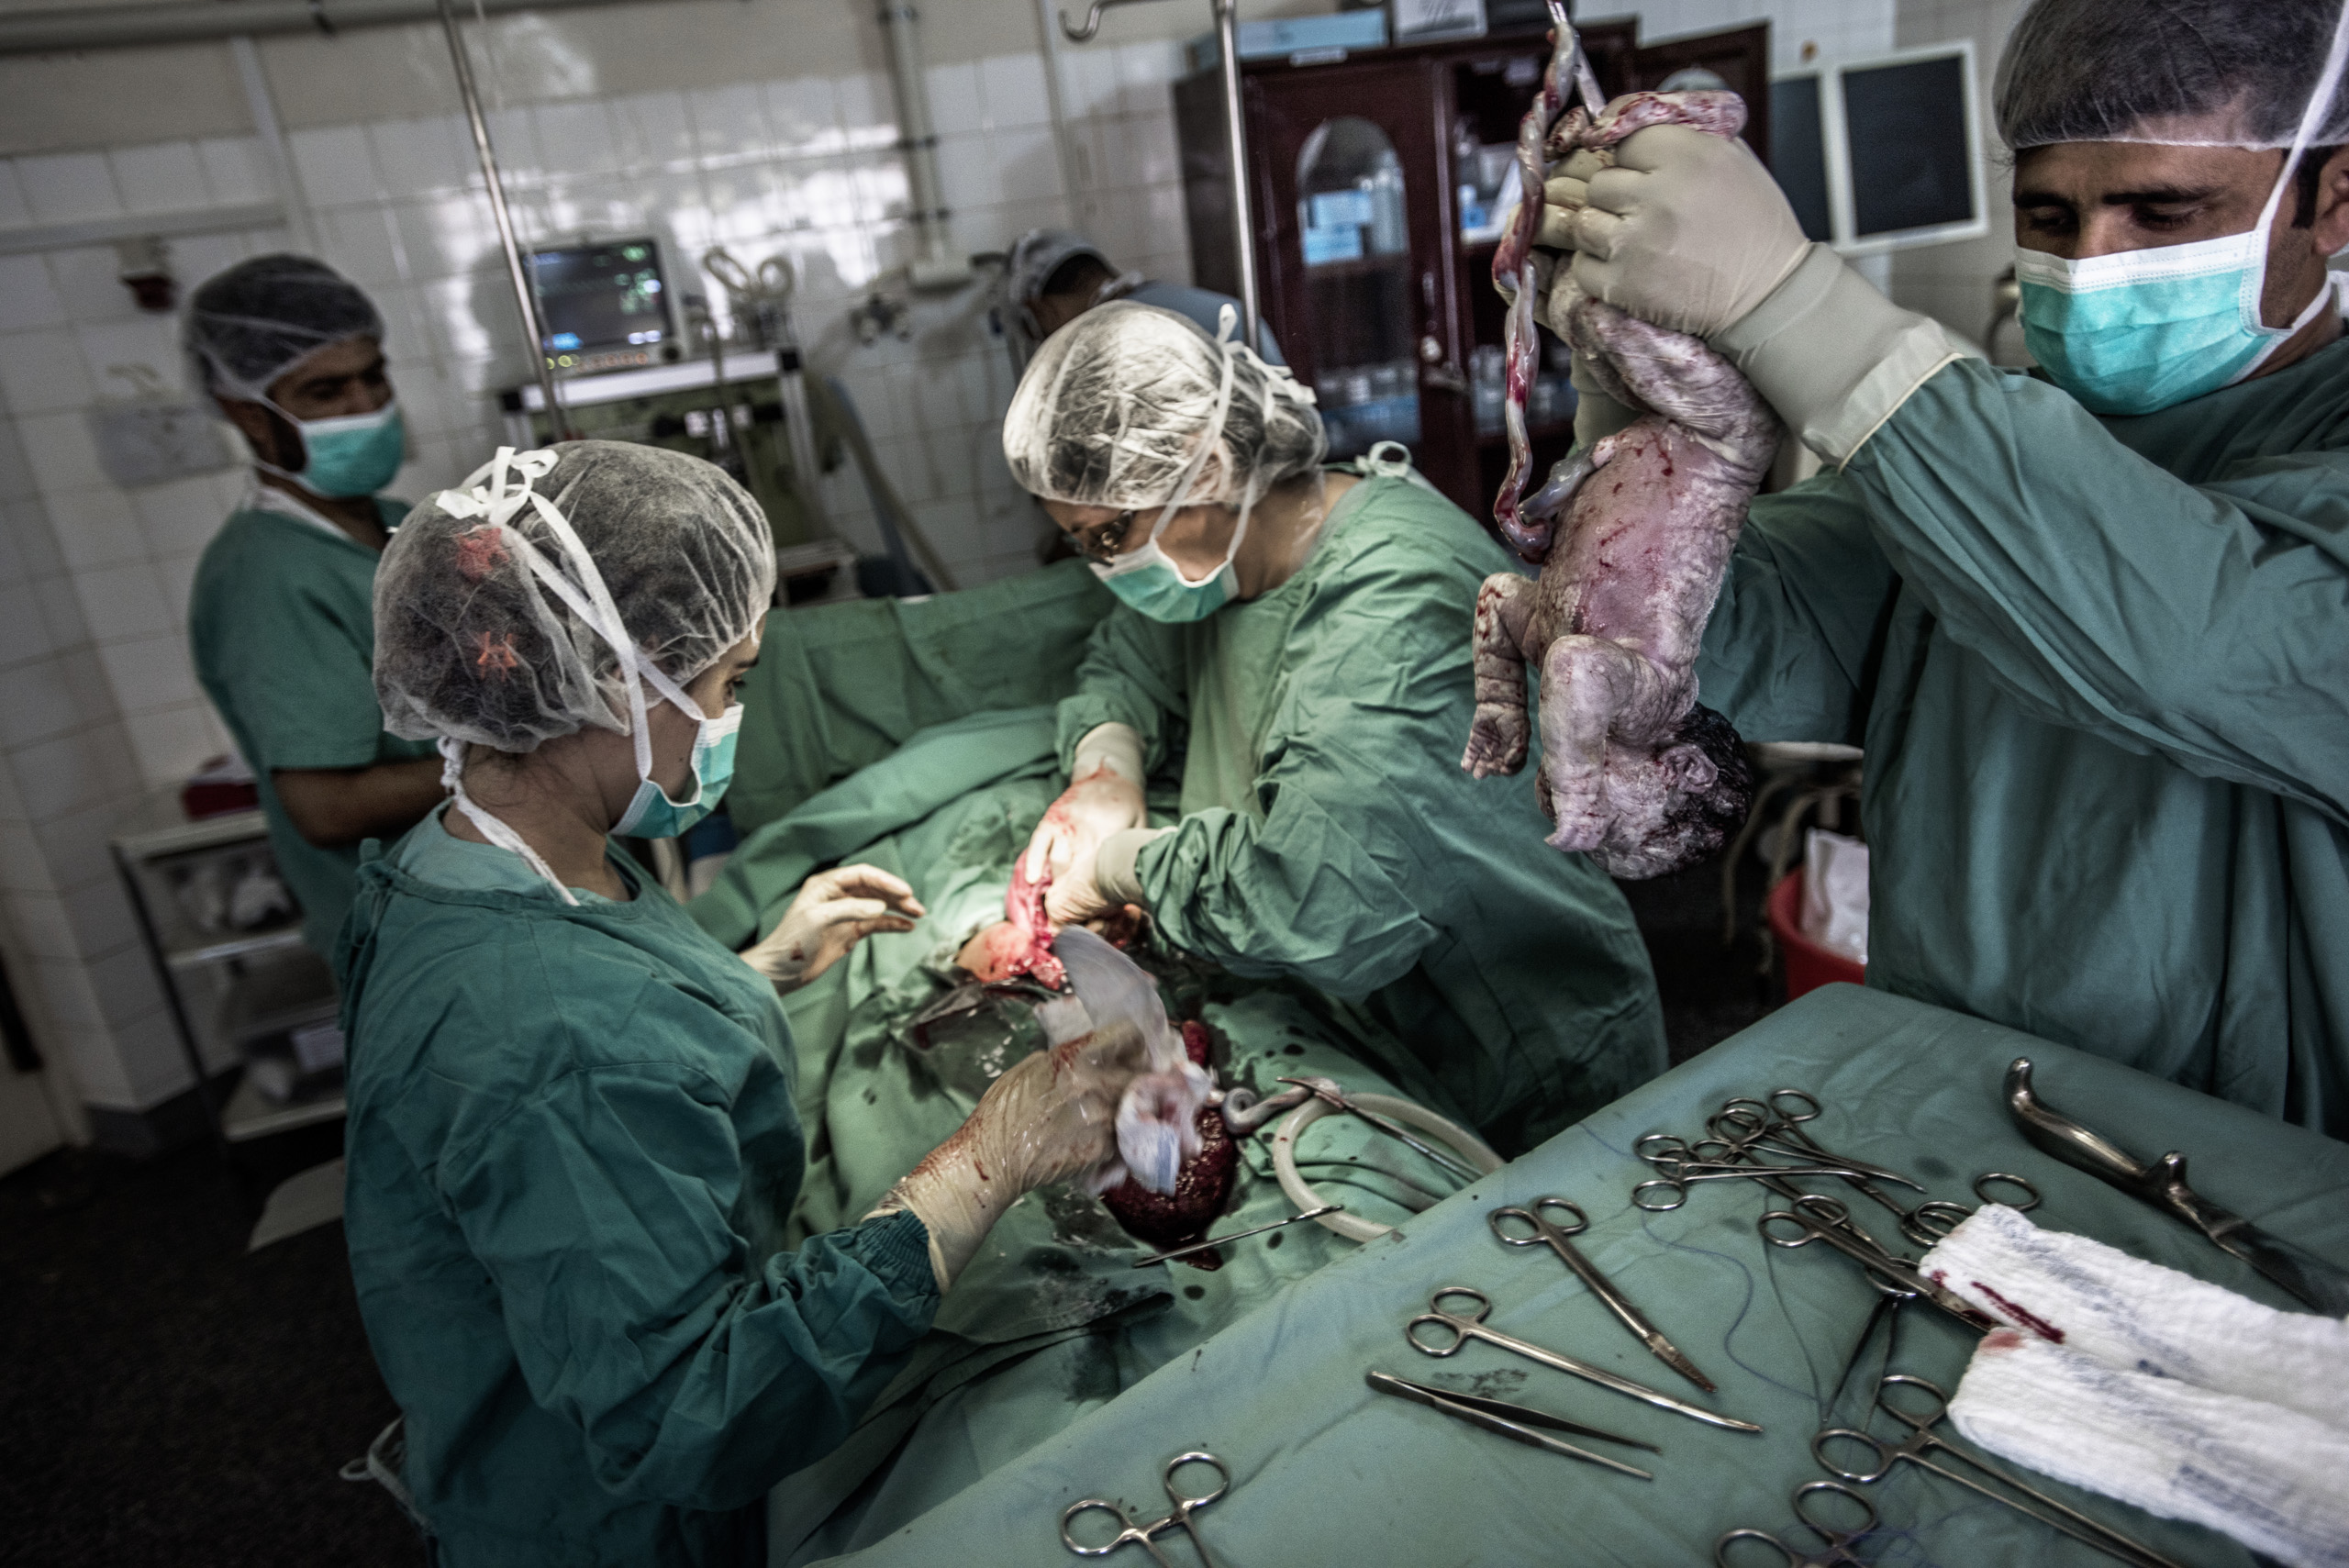 A cesarean section at the operating theatre in  a Doctors Without Borders hospital, Lashkar Gah, Helmand, Afghanistan, June 2016.